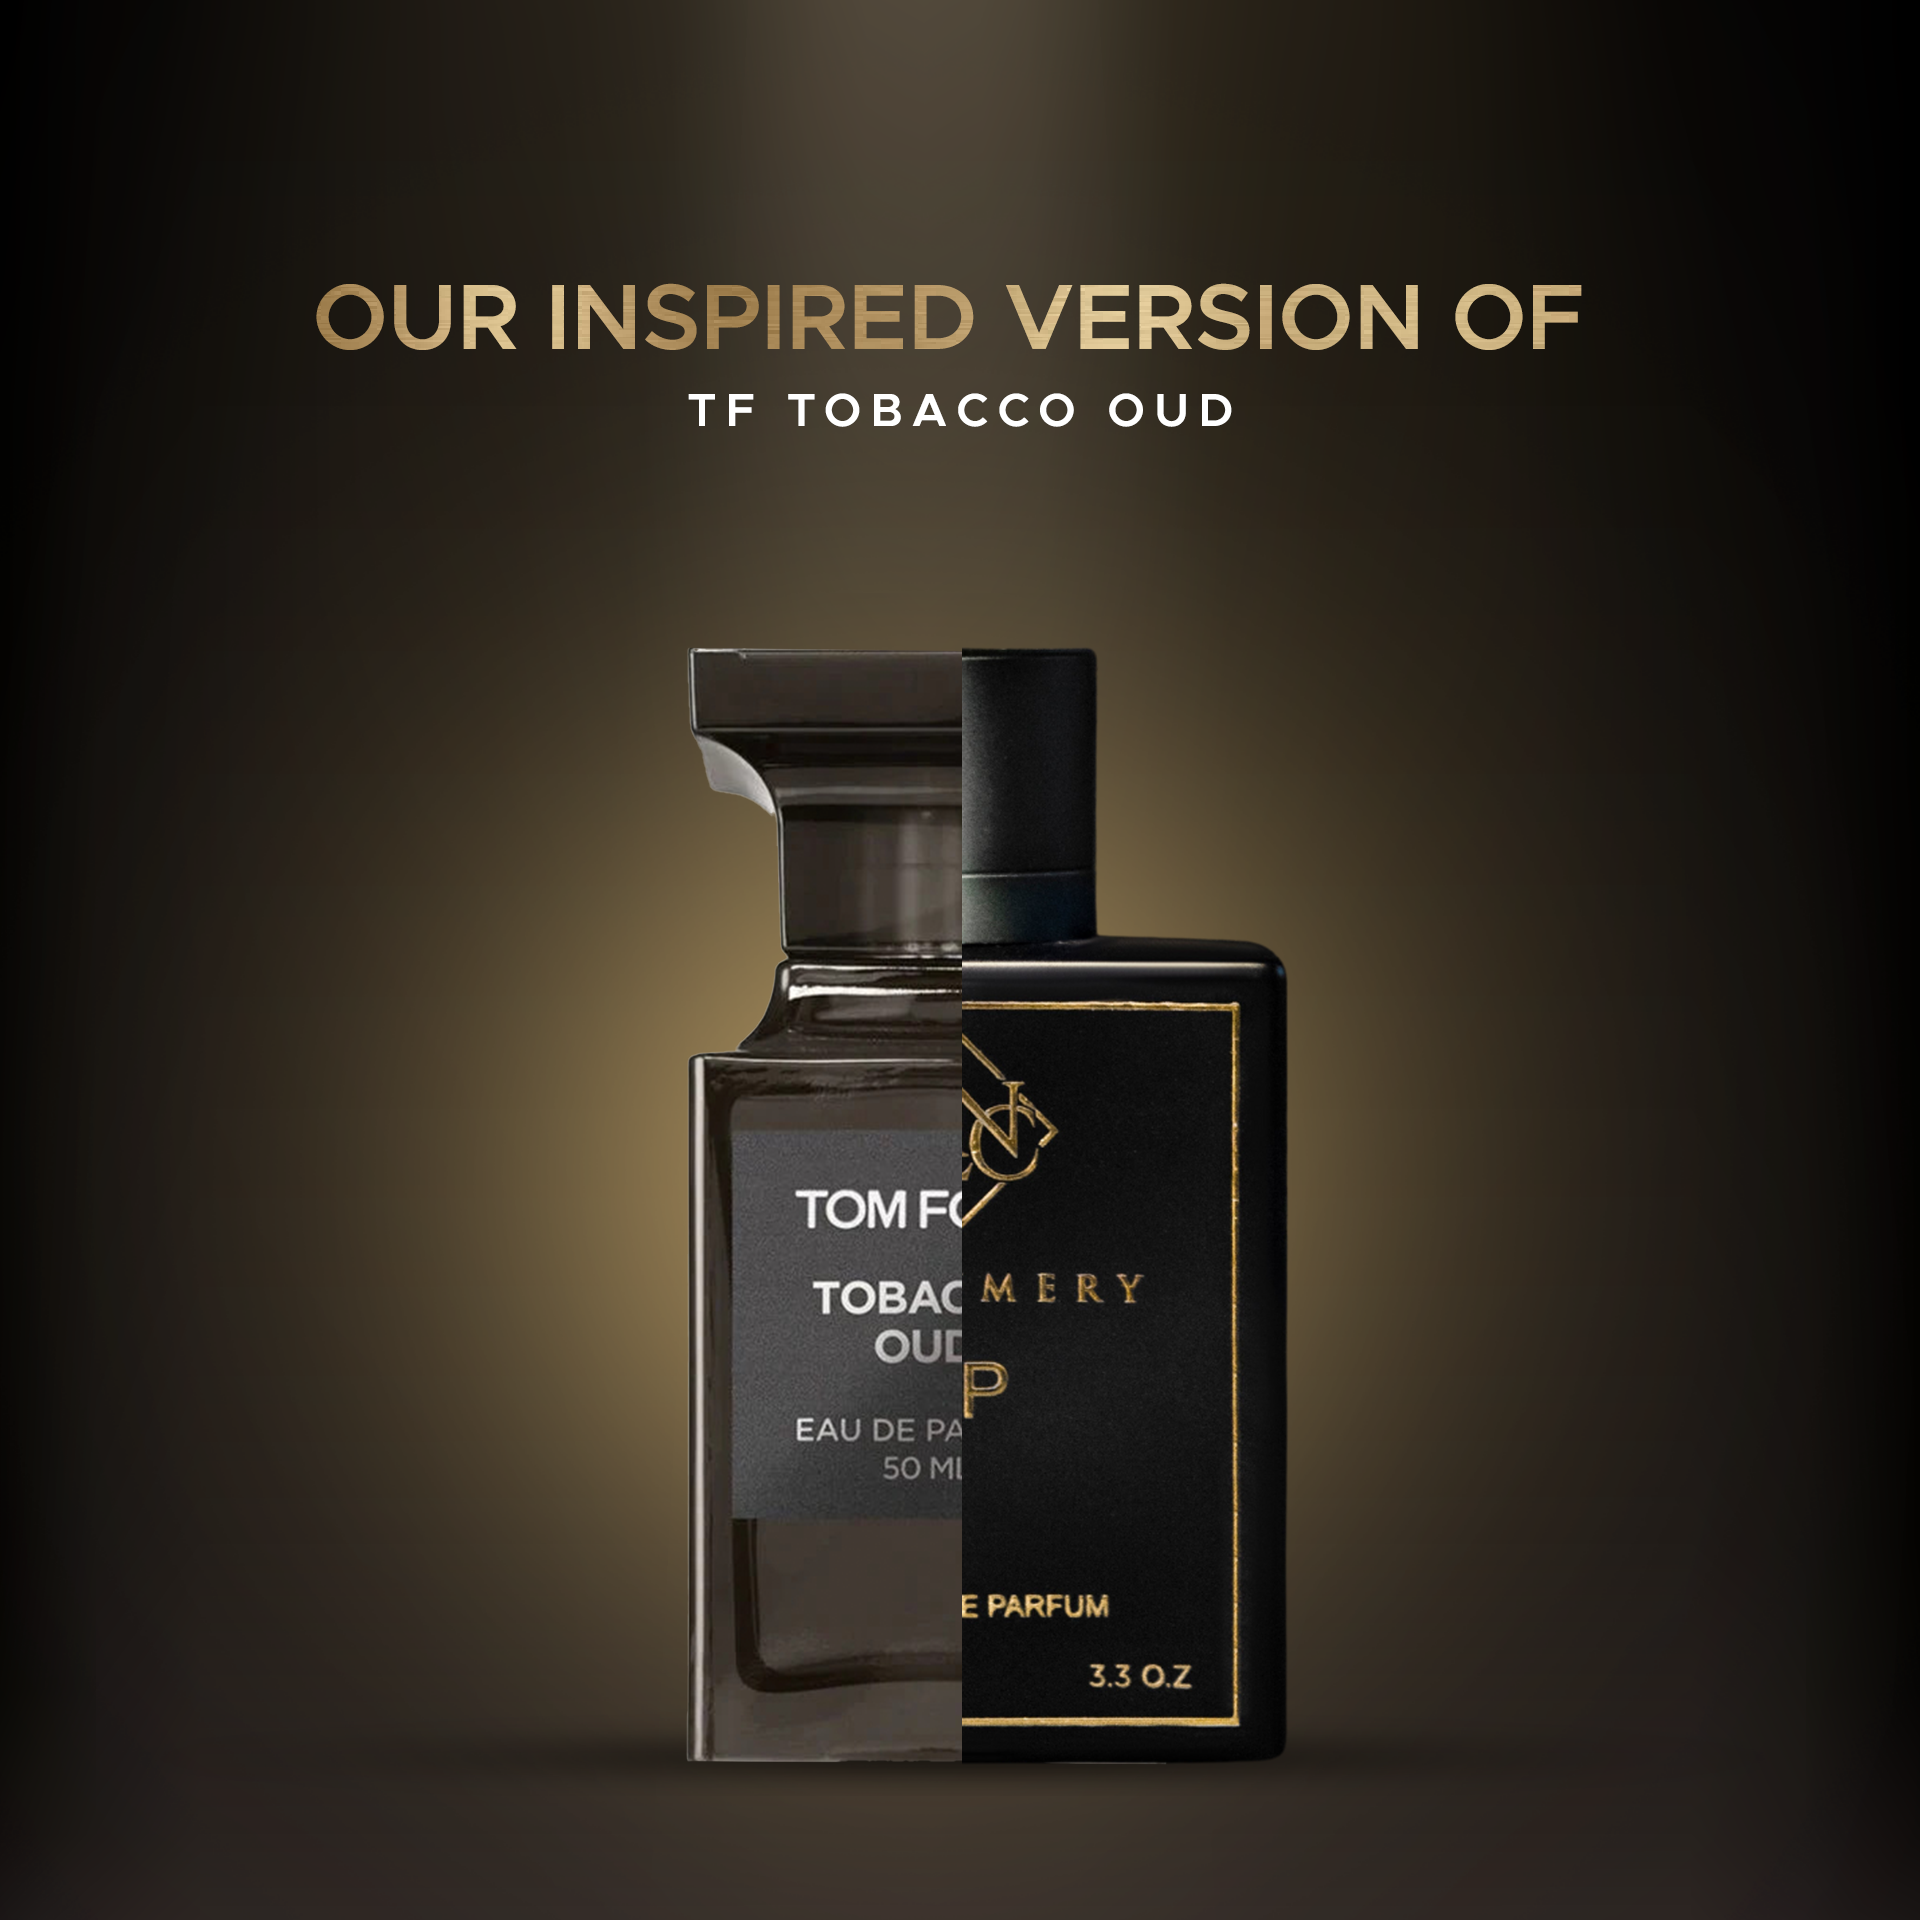 tom ford tobacco oud, tom ford tobacco oud price in india, tom ford tobacco oud review,tom ford tobacco oud clone perfume, tom ford tobacco oud inspired perfume, tom ford tobacco oud 100ml, tom ford tobacco oud 60ml, tom ford tobacco oud 20ml, tom ford tobacco oud notes